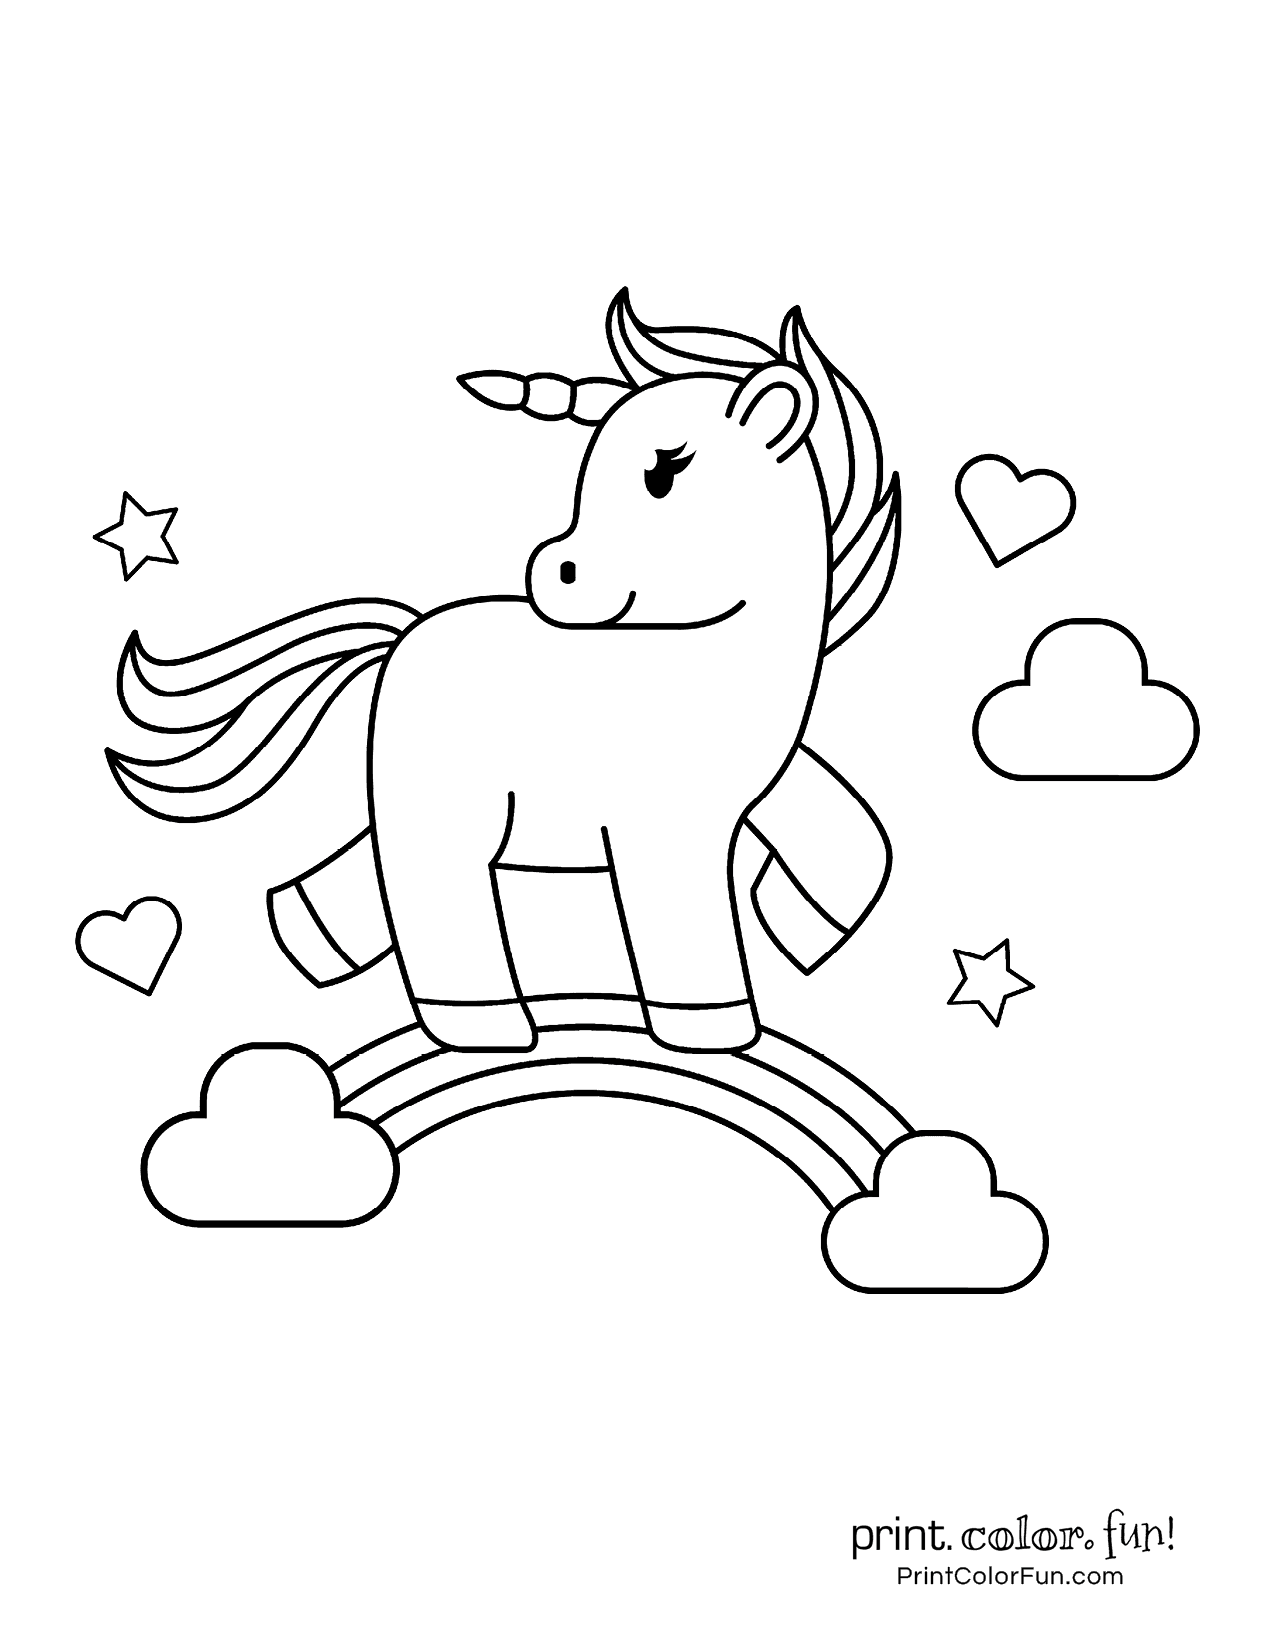 free printable coloring pages of unicorns lovely unicorn coloring page free printable coloring pages unicorns free coloring of printable pages 